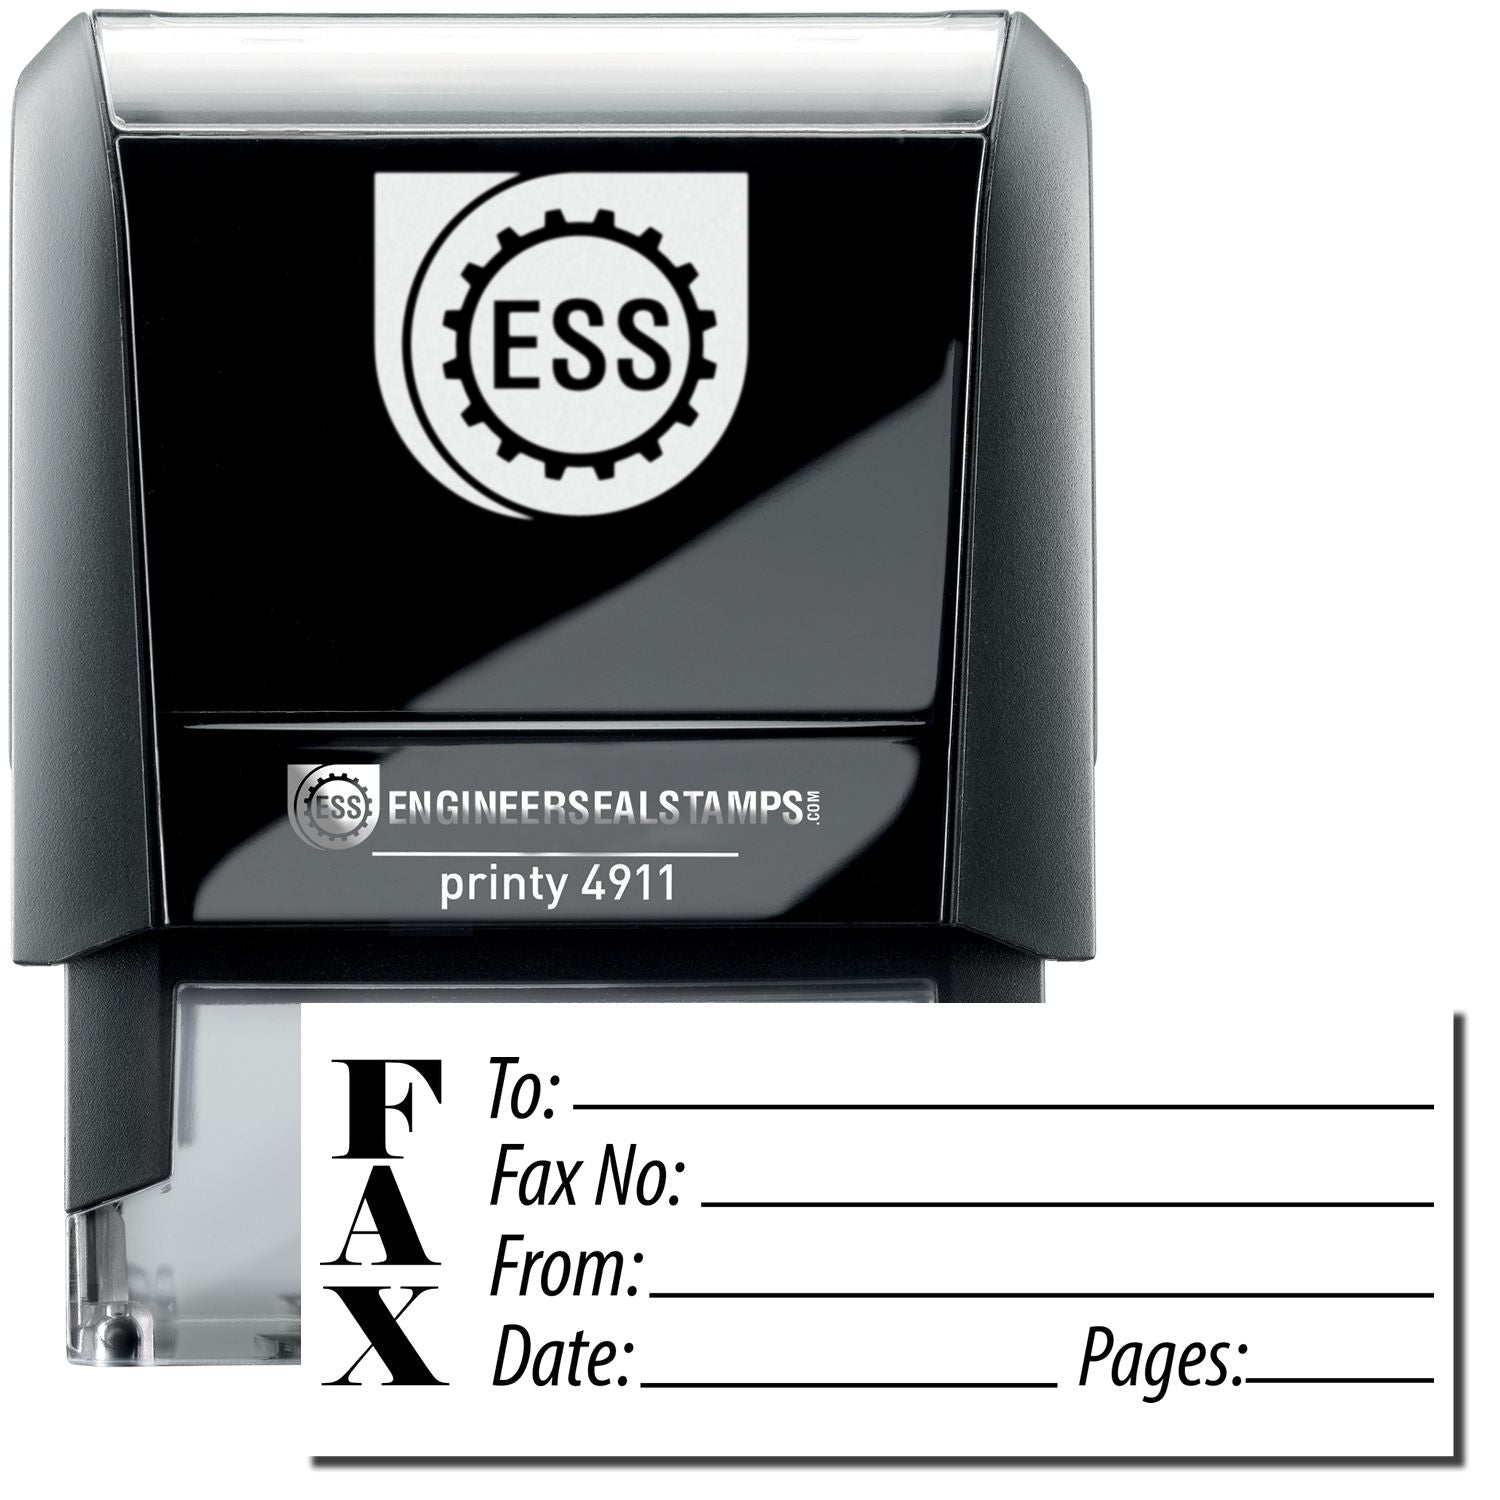 A self-inking stamp with a stamped image showing how the word "FAX" (while the rest of the stamp has space for a recipient's name, the fax number, who is sending the fax, when the fax is being sent, and how many pages the fax is composed of) is displayed vertically after stamping.